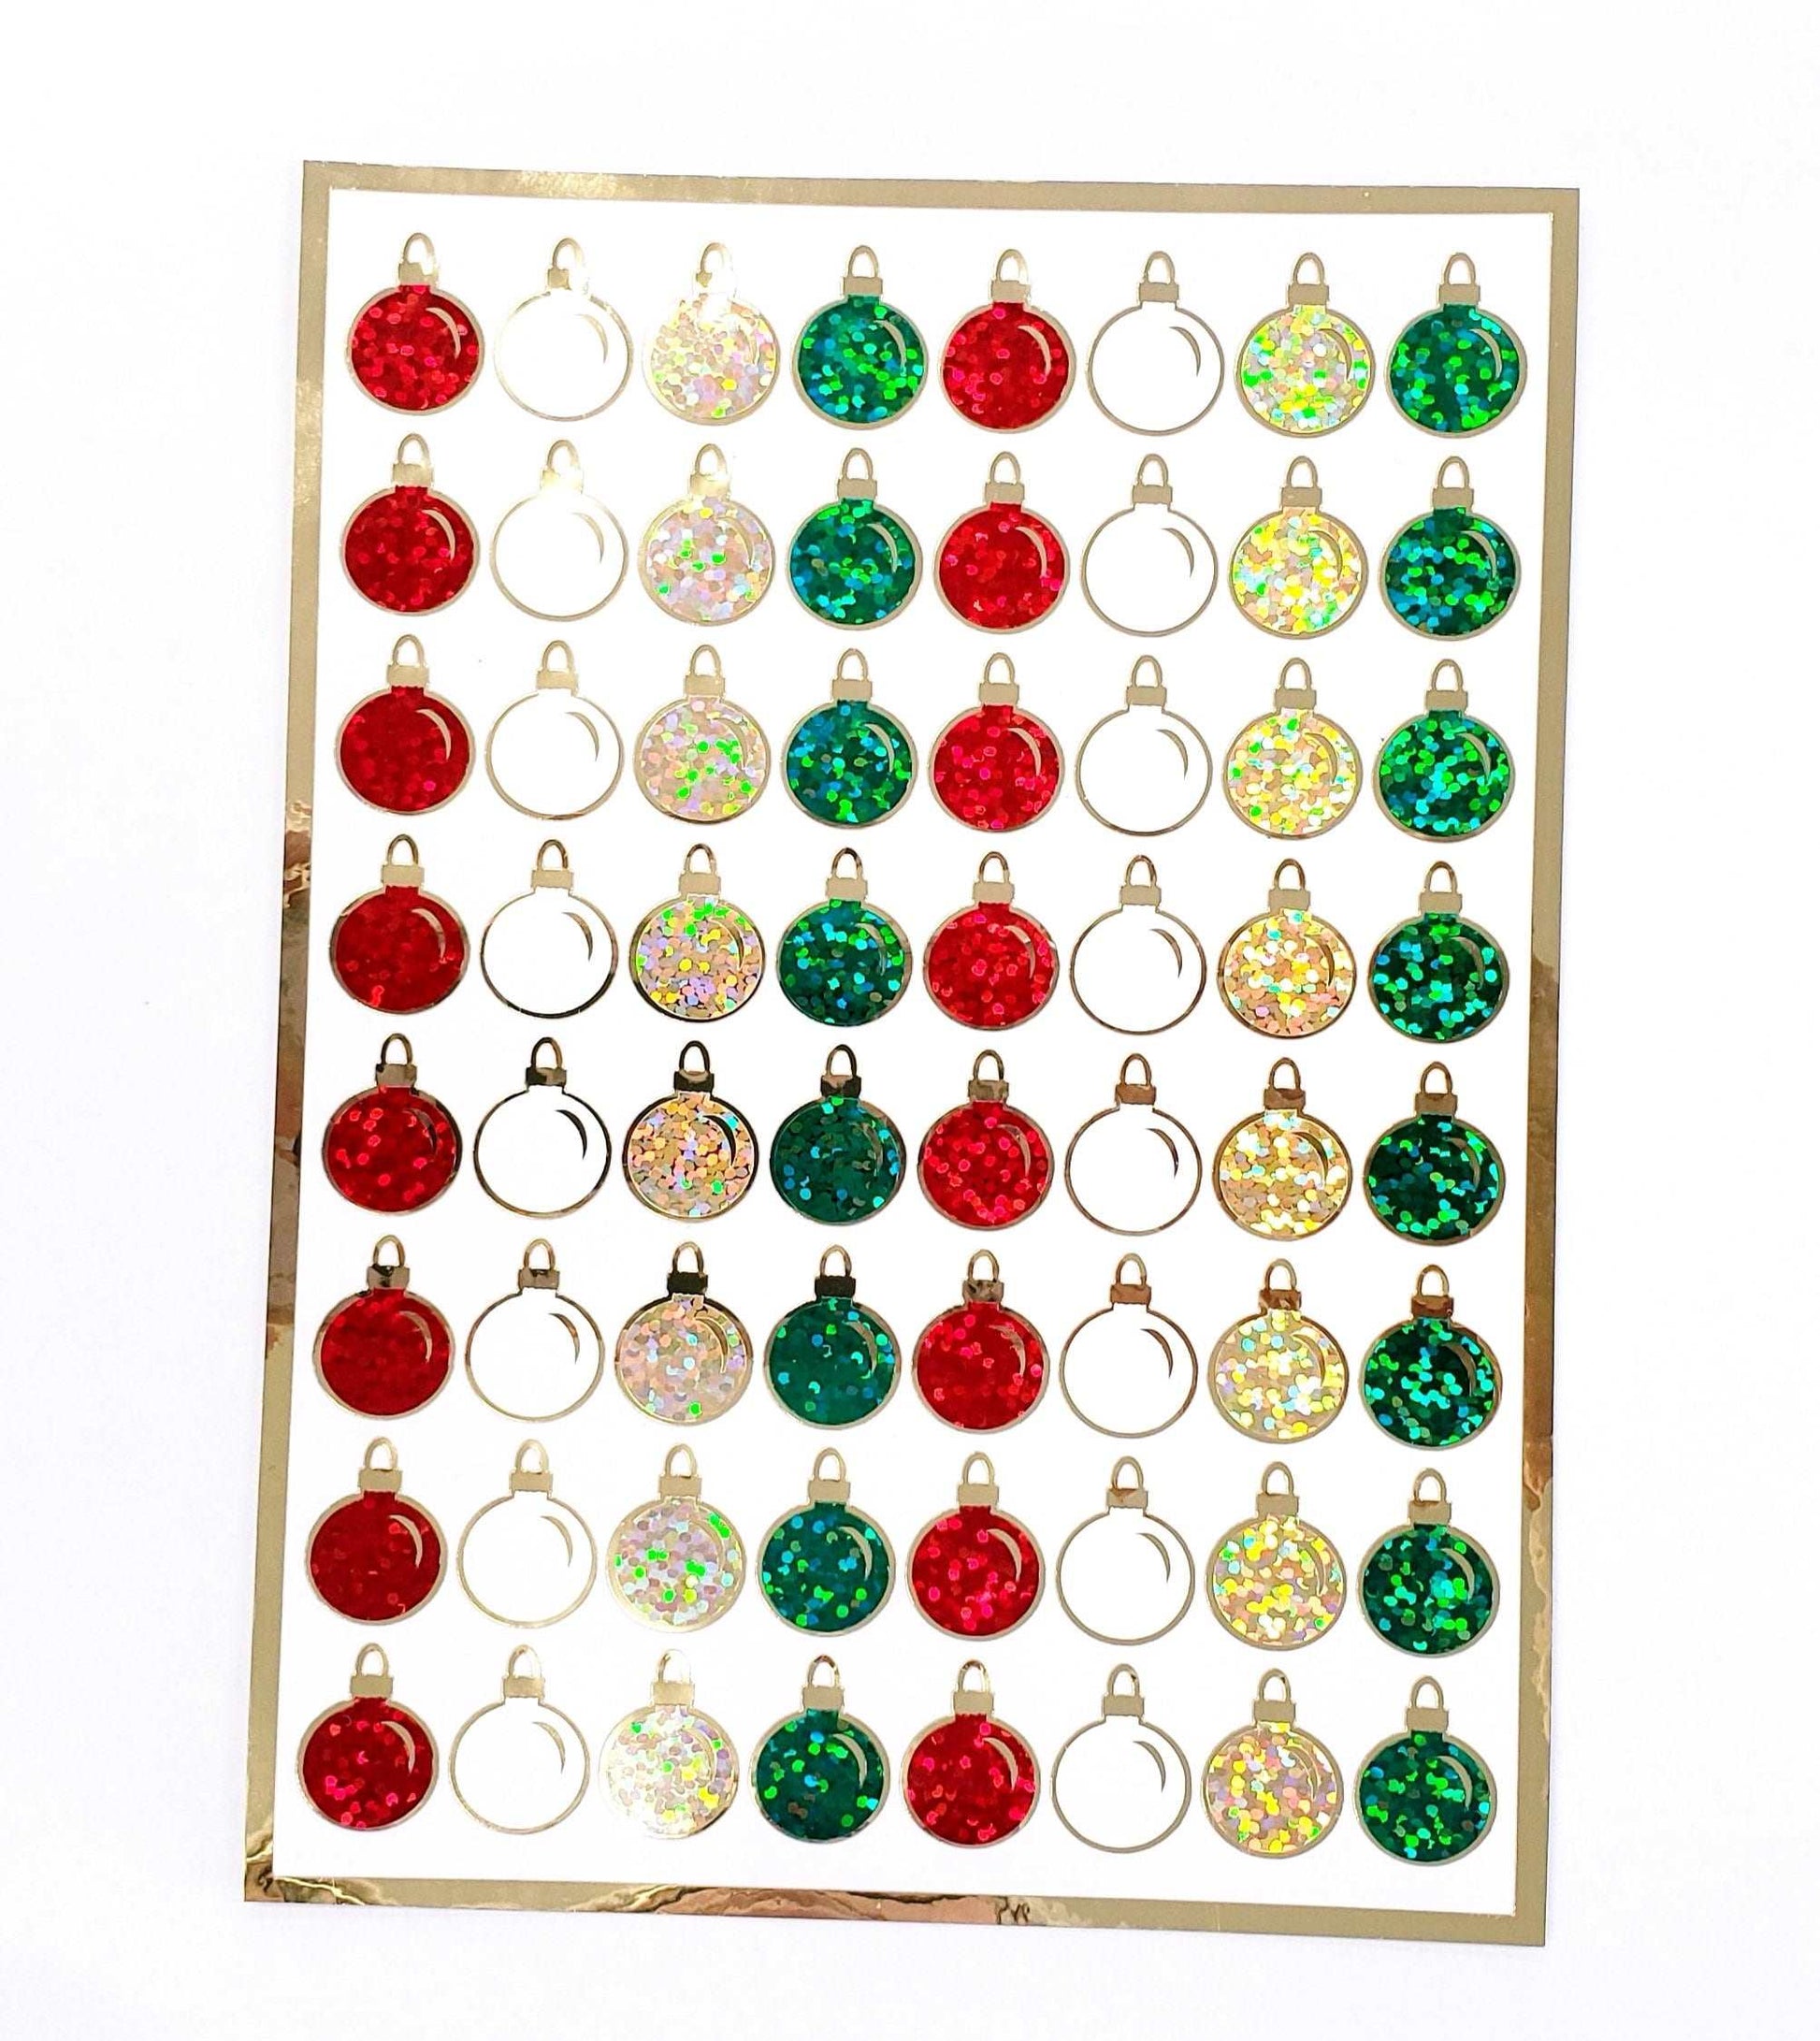 Christmas Ball Ornaments Sticker Sheet. Set of 64 small red green and gold vinyl decals for holiday cards, gift tags and advent calendars